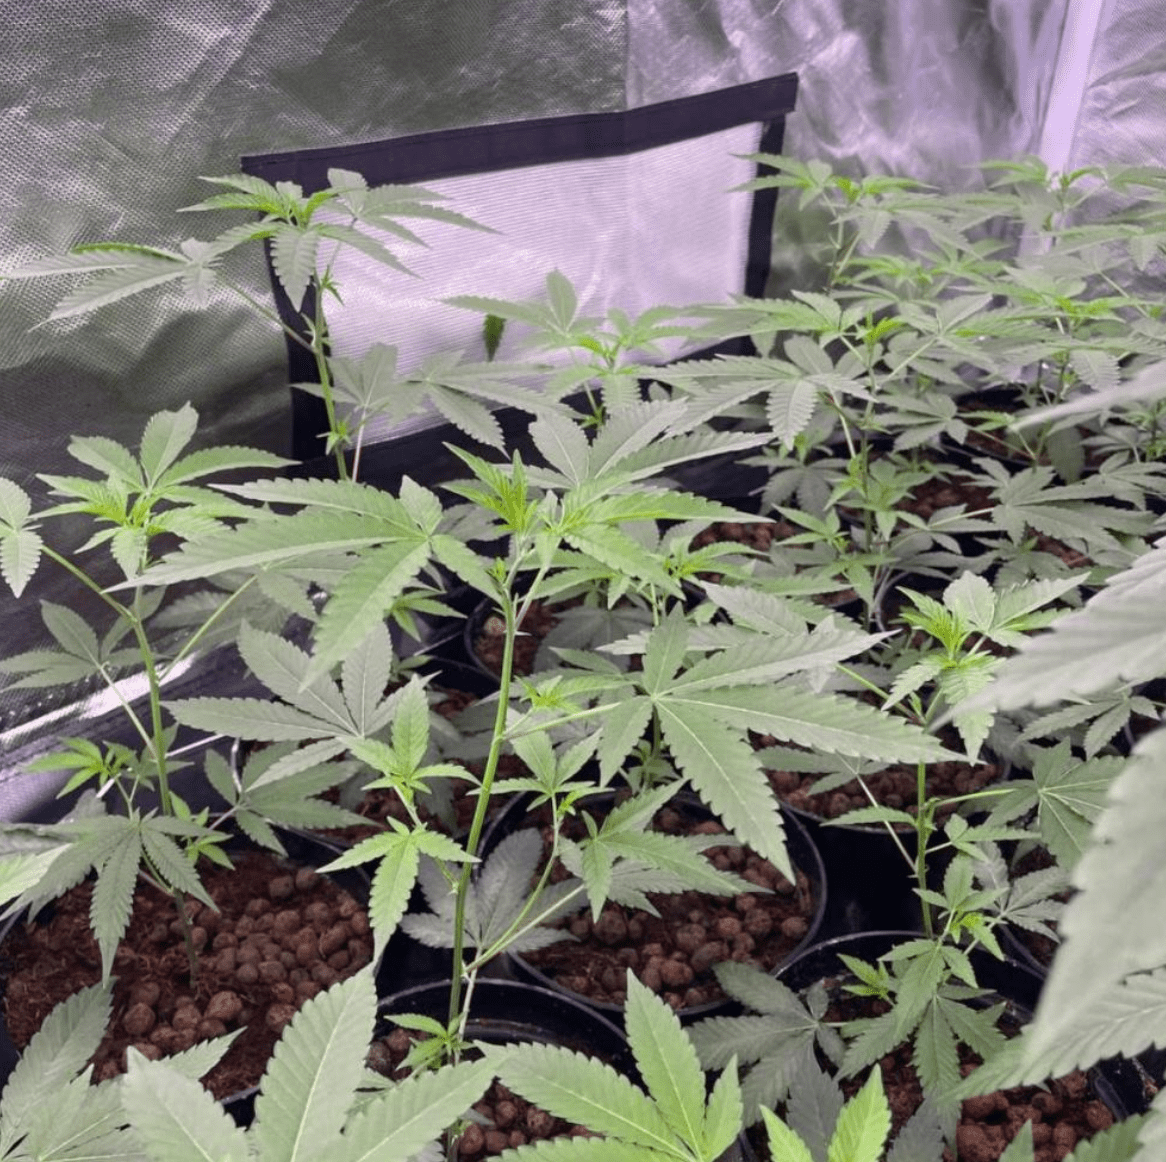 Rs 11 strain from clones to harvest